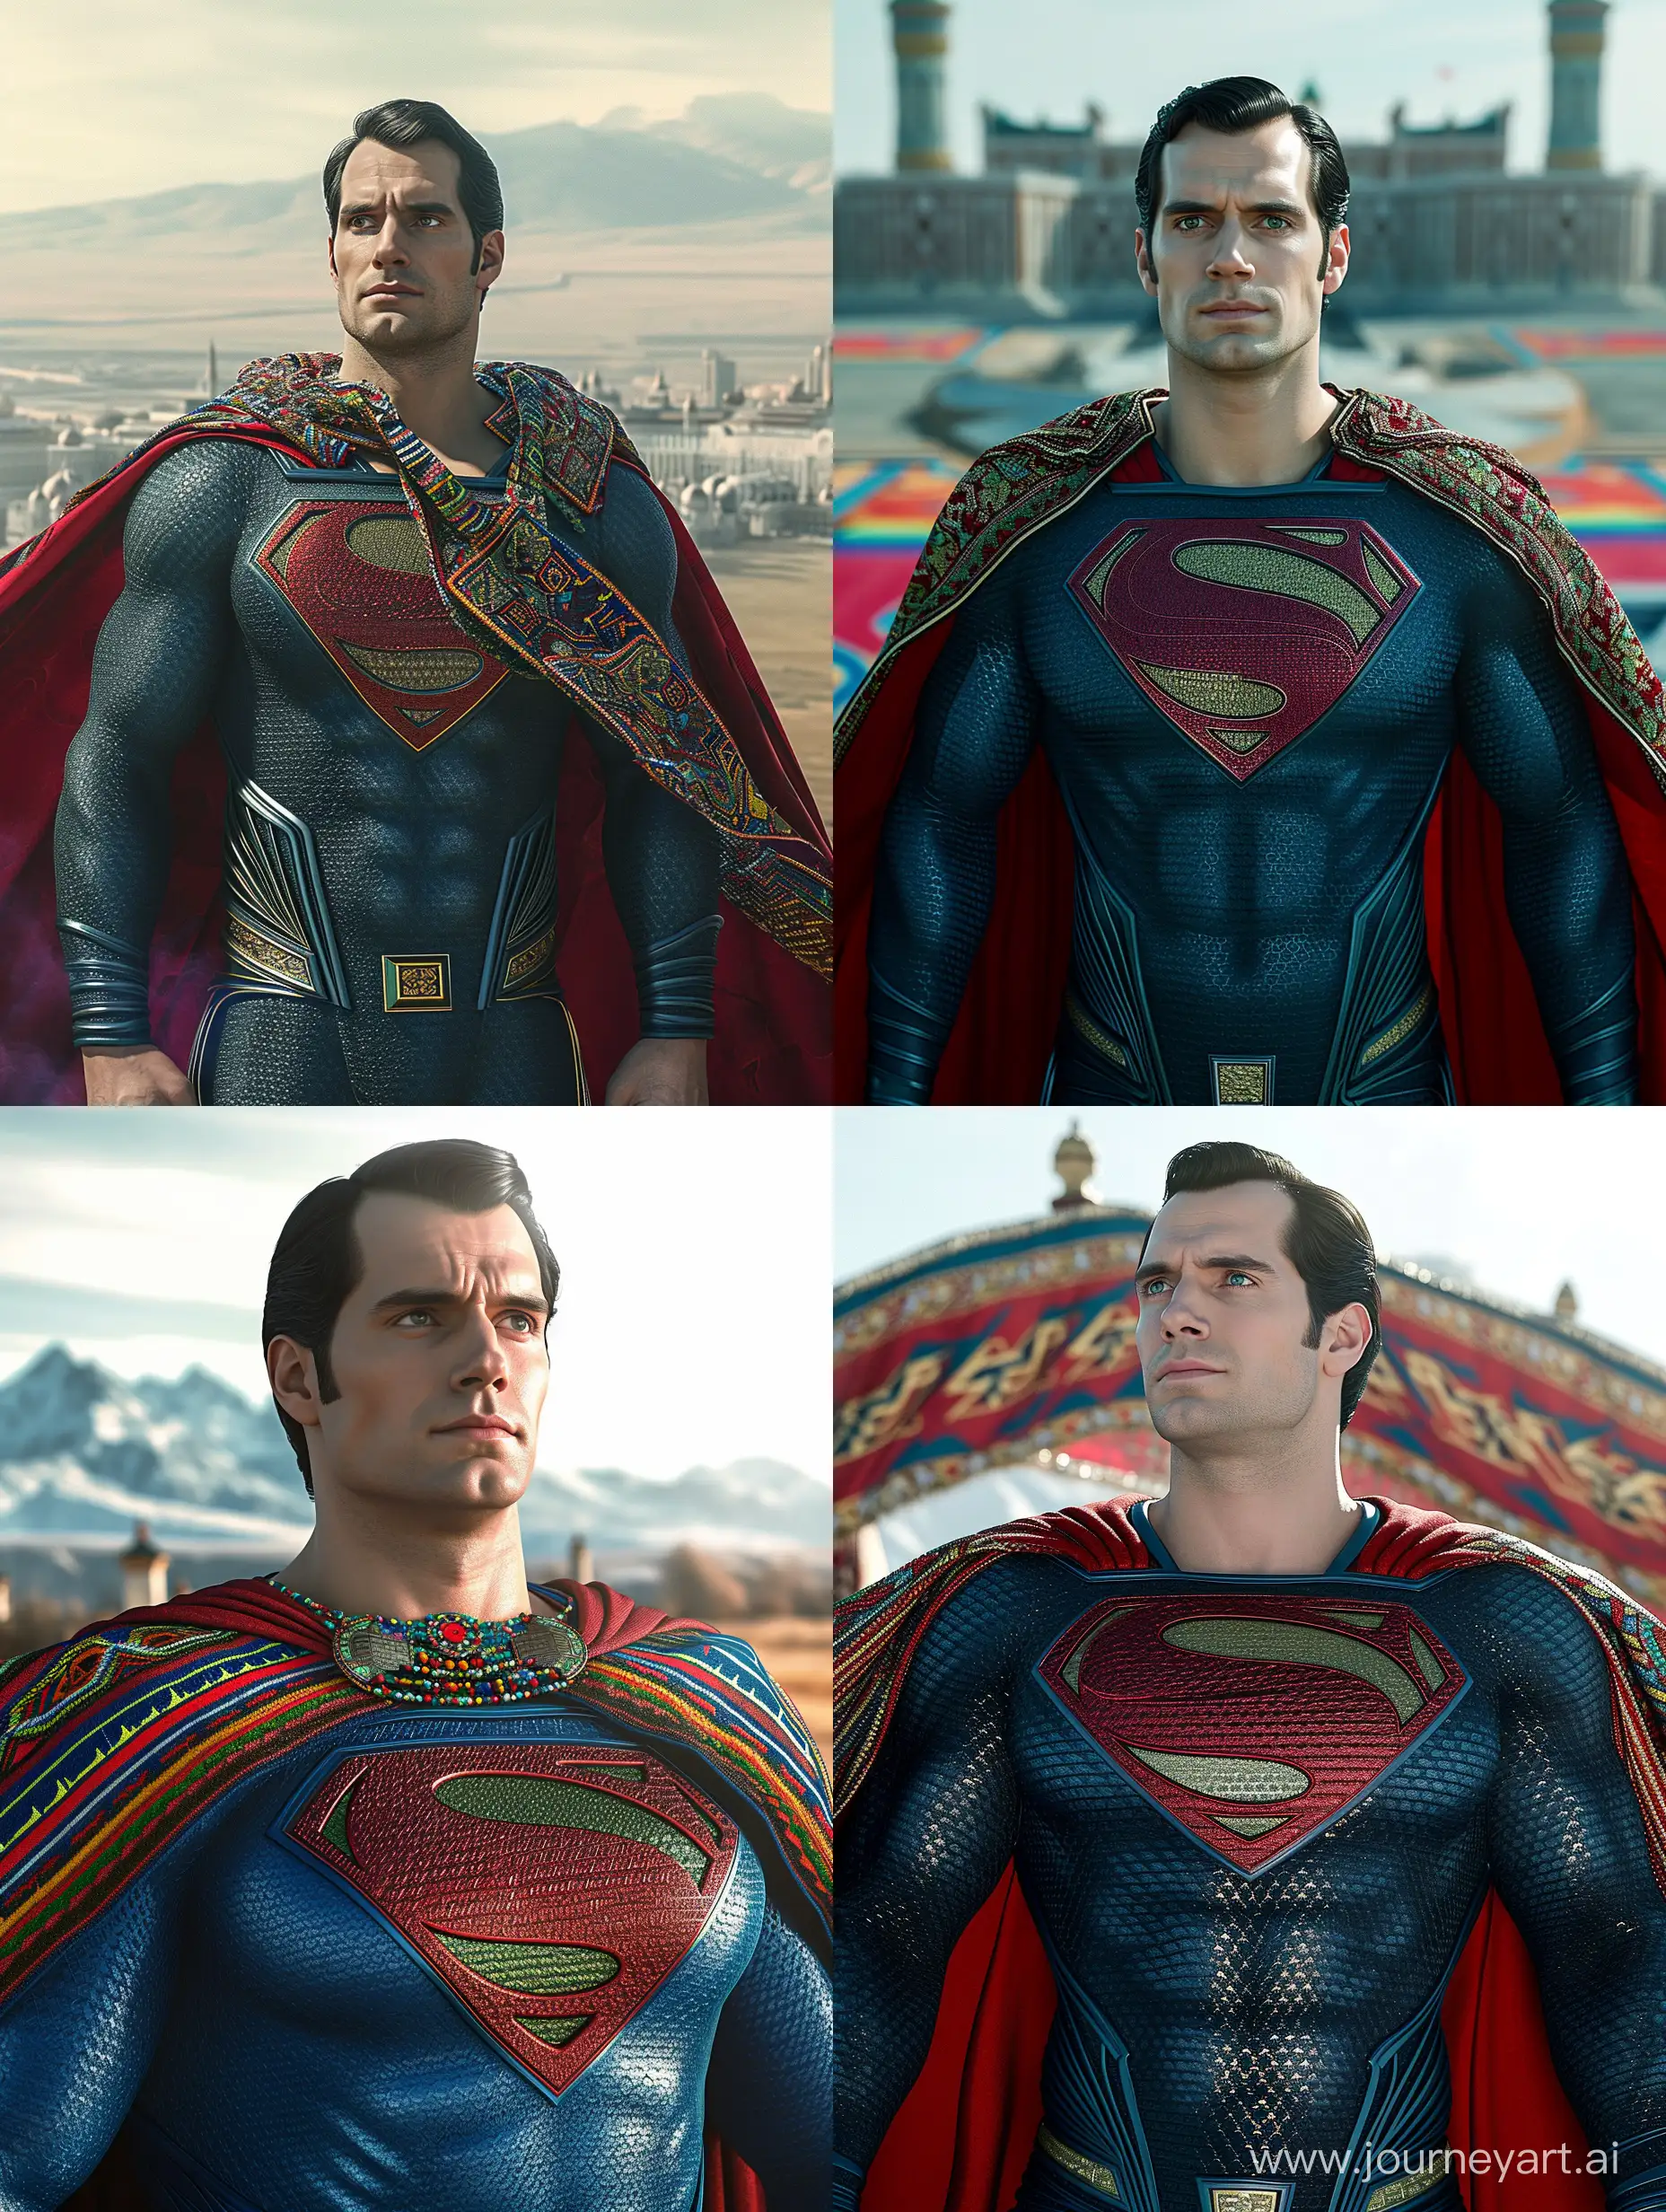 Henry Cavill superman, In Kazakhstan traditional attire, Almaty Kazakhstan behind him, far view from front, shot from the movie, cinematic, photorealistic, ultra-detailed, 4k